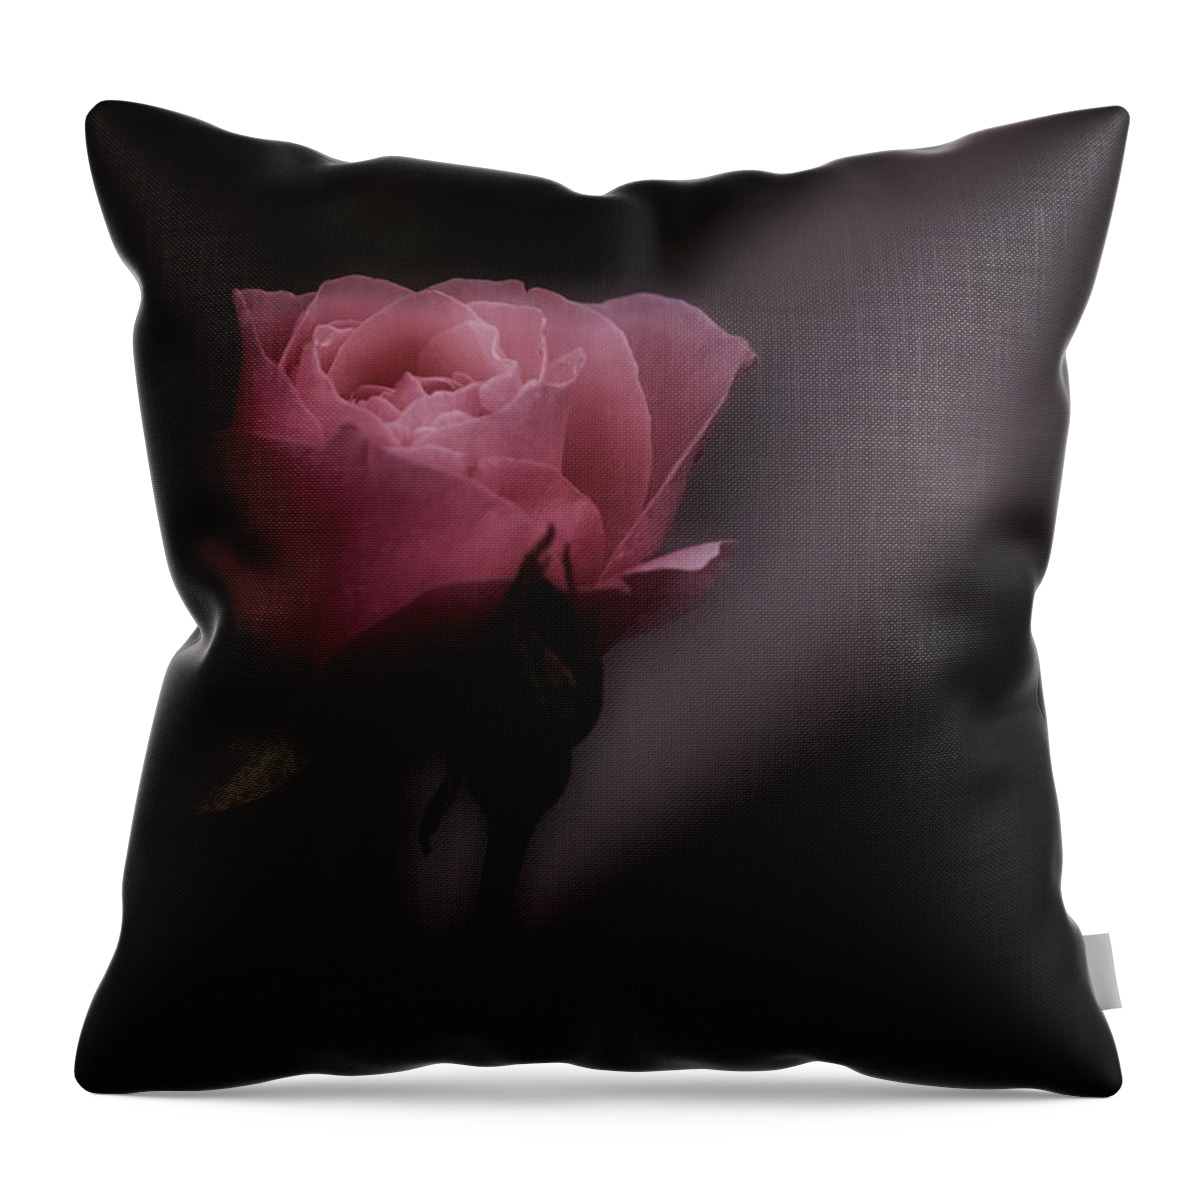 Pink Rose Throw Pillow featuring the photograph Romantic Pink Rose by Richard Cummings